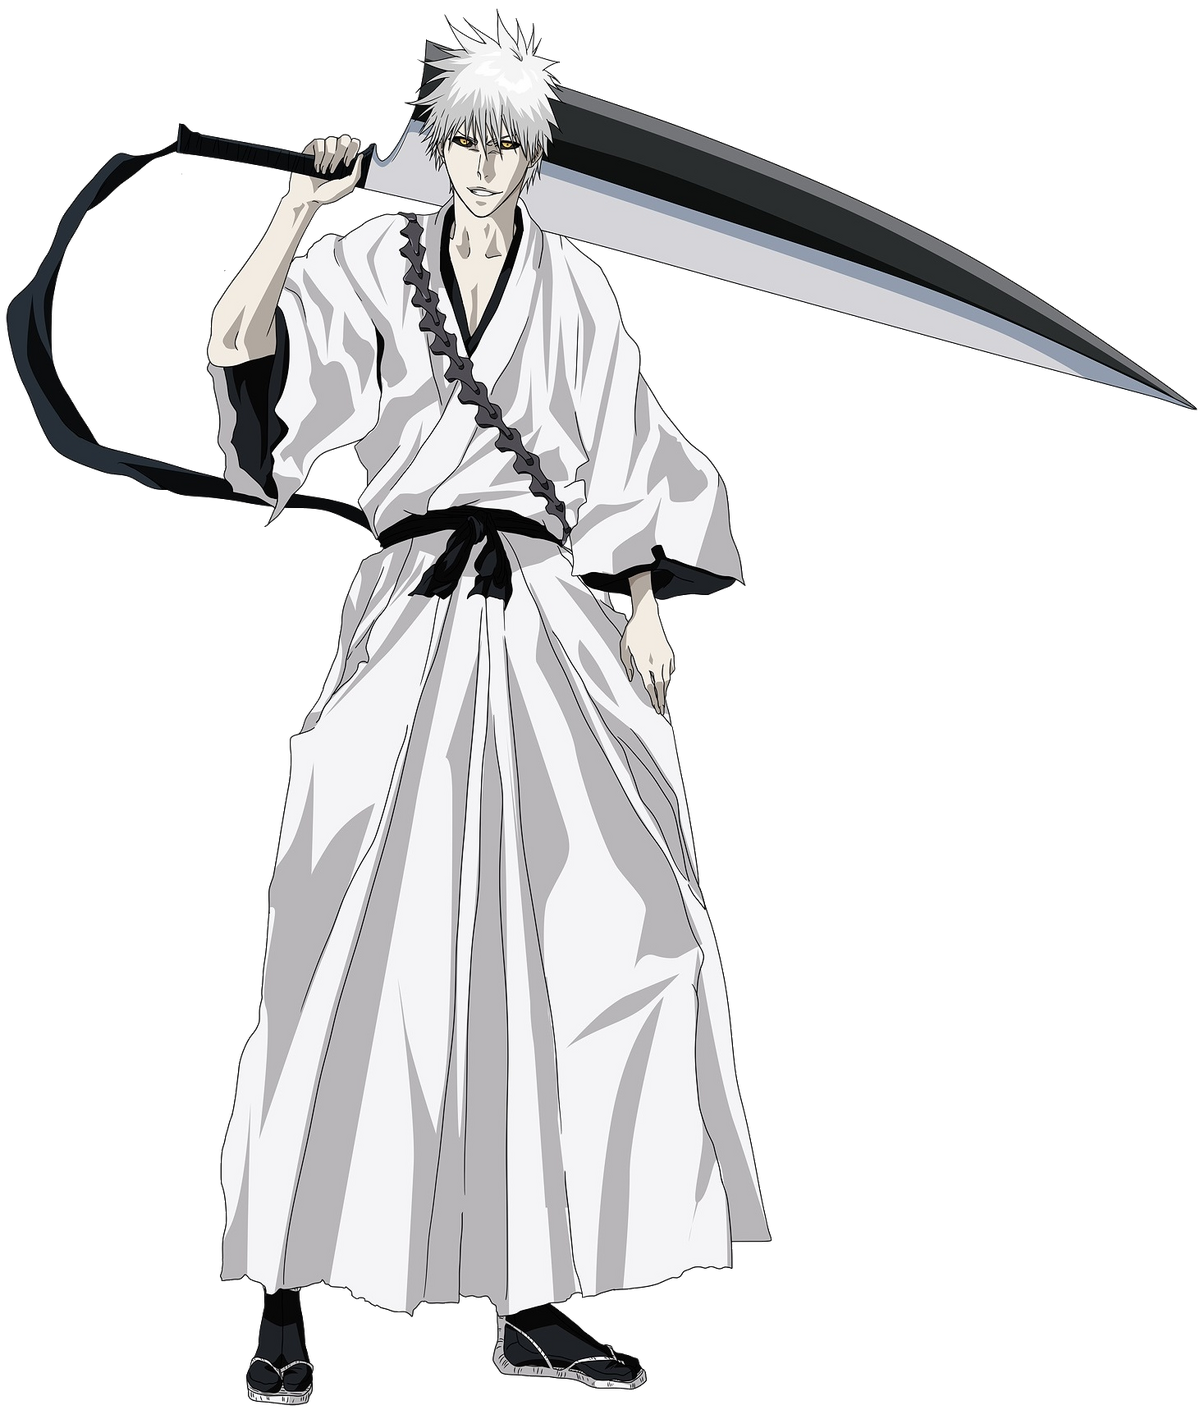 Bleach Fans Are Freaking Out Over Ichigo's New Design